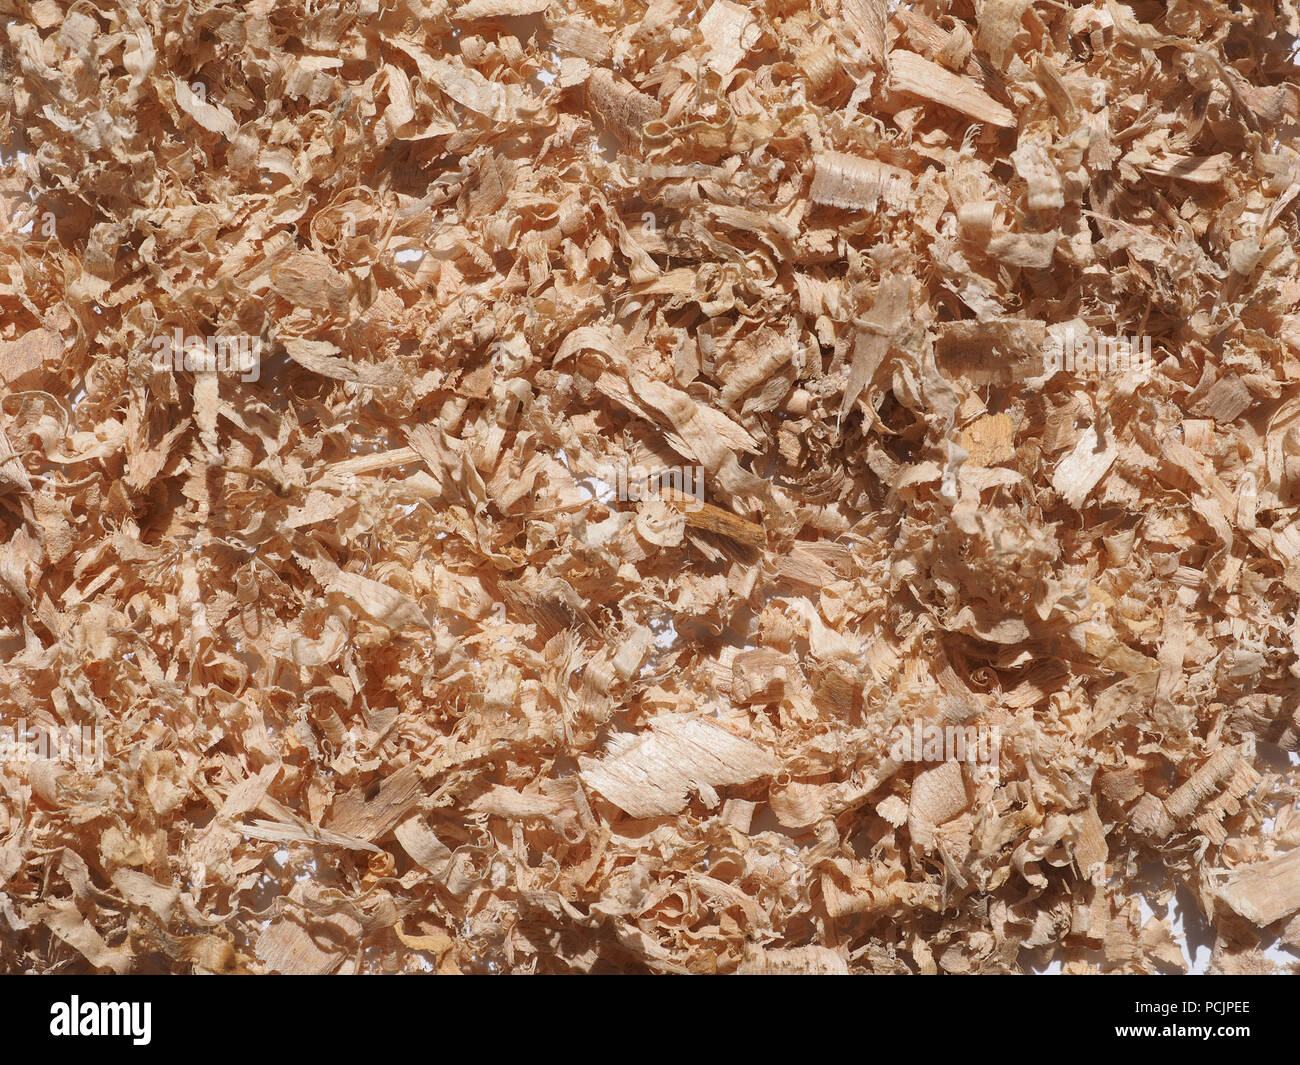 Sawdust wood dust byproduct or waste product of woodworking operations such  as sawing milling planing routing drilling and sanding composed of fine pa  Stock Photo - Alamy